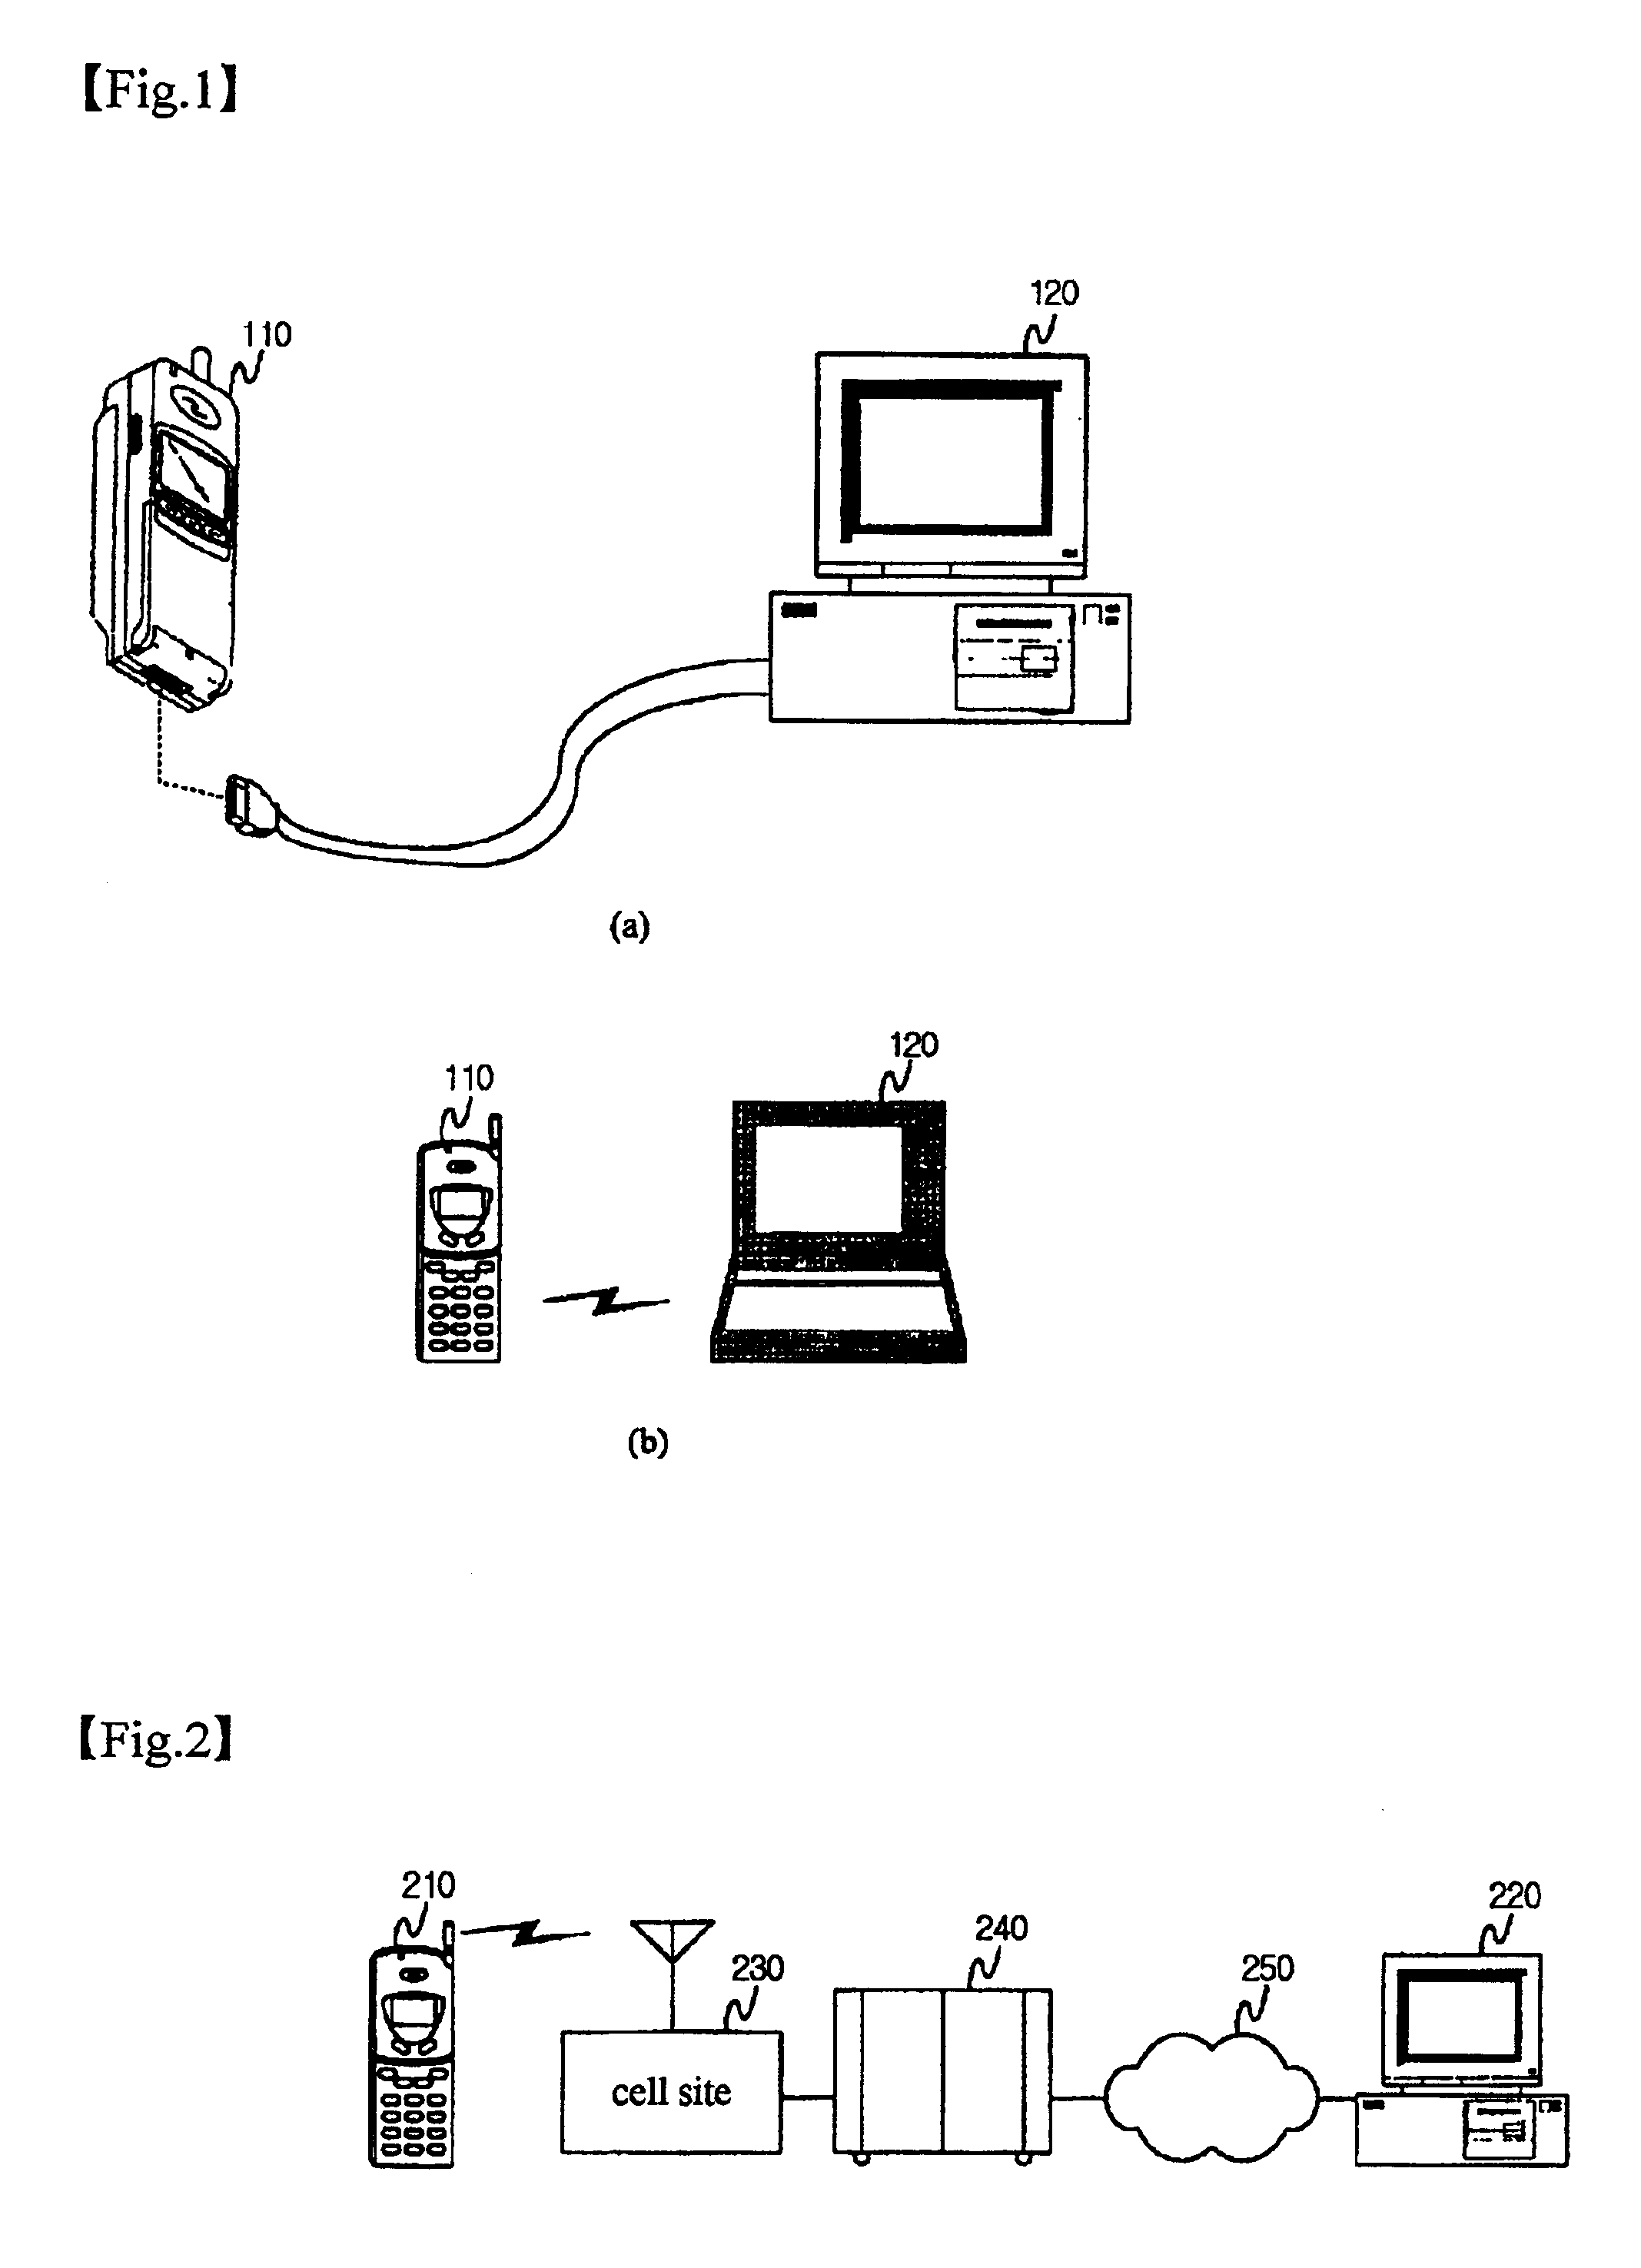 Method of remote management of mobile communication terminal data